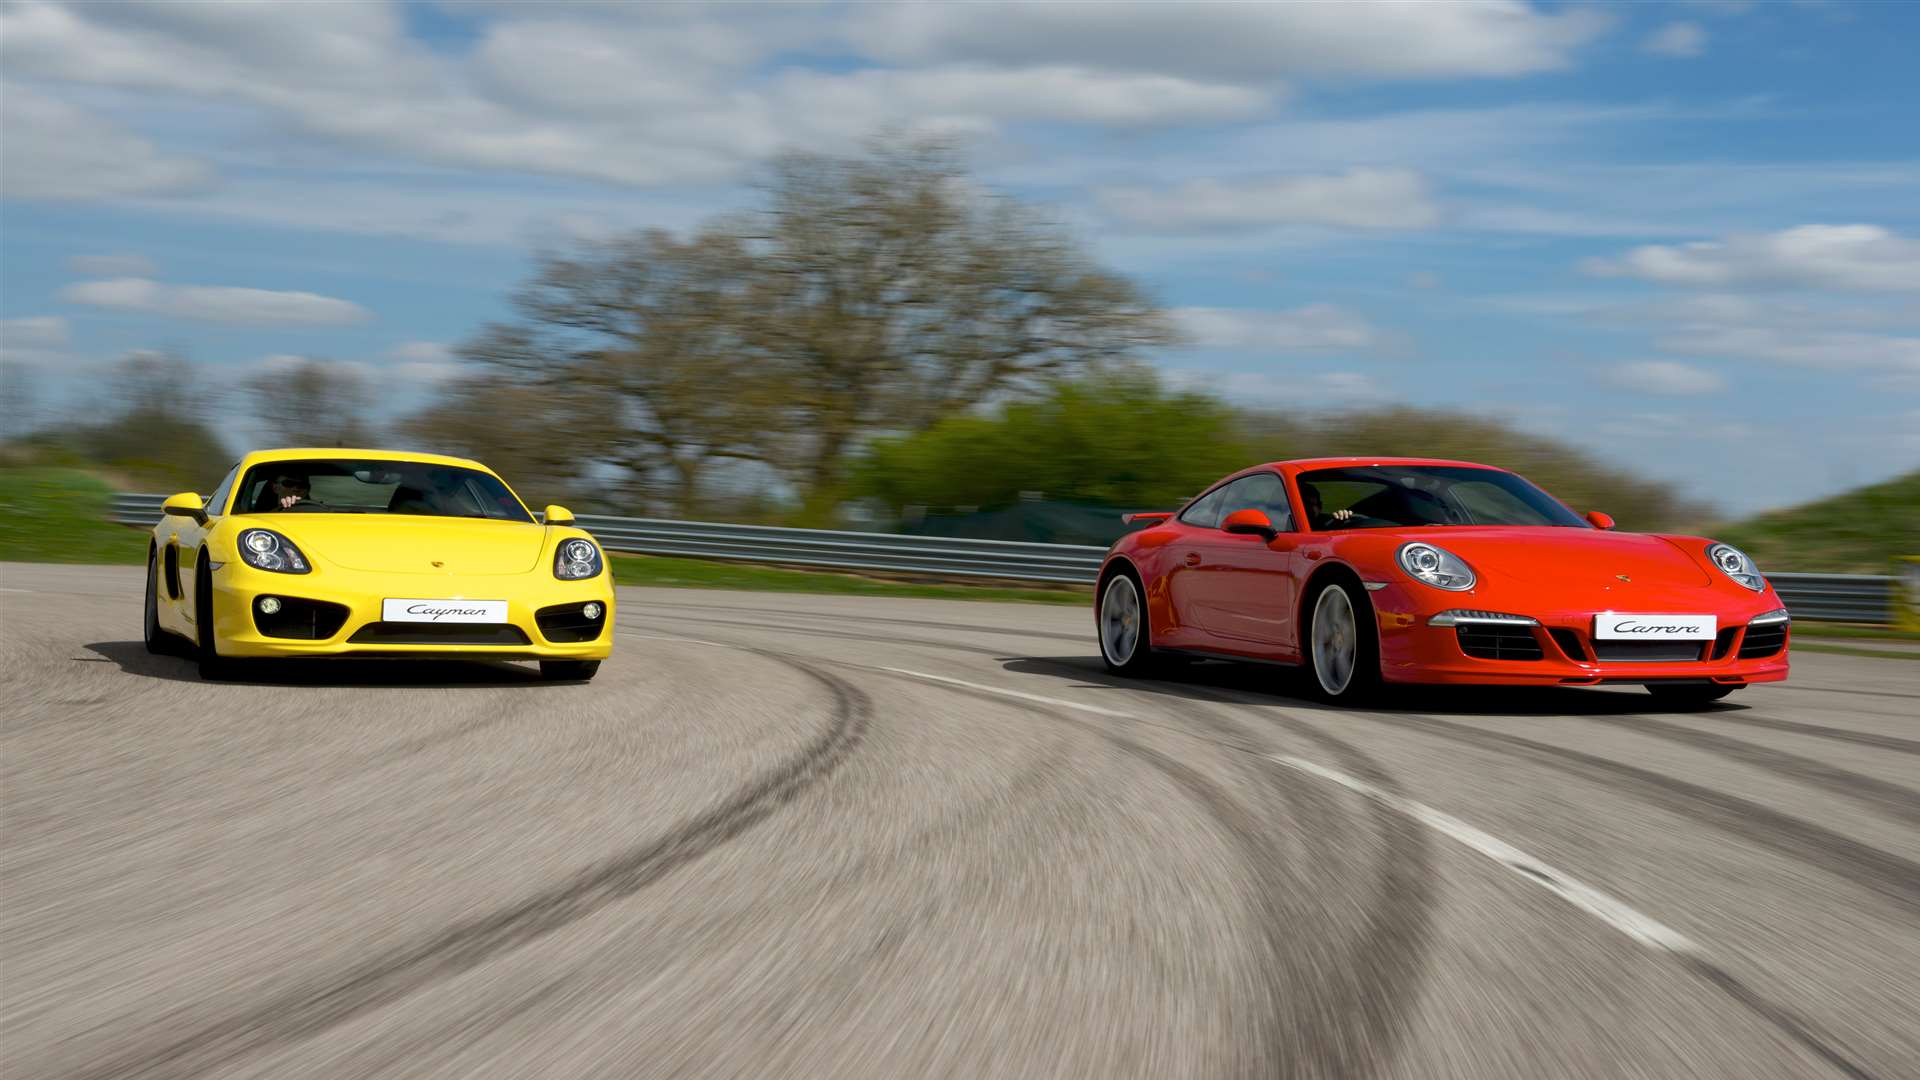 You can drive the Porsche model of your choice under the eye of a trained instructor